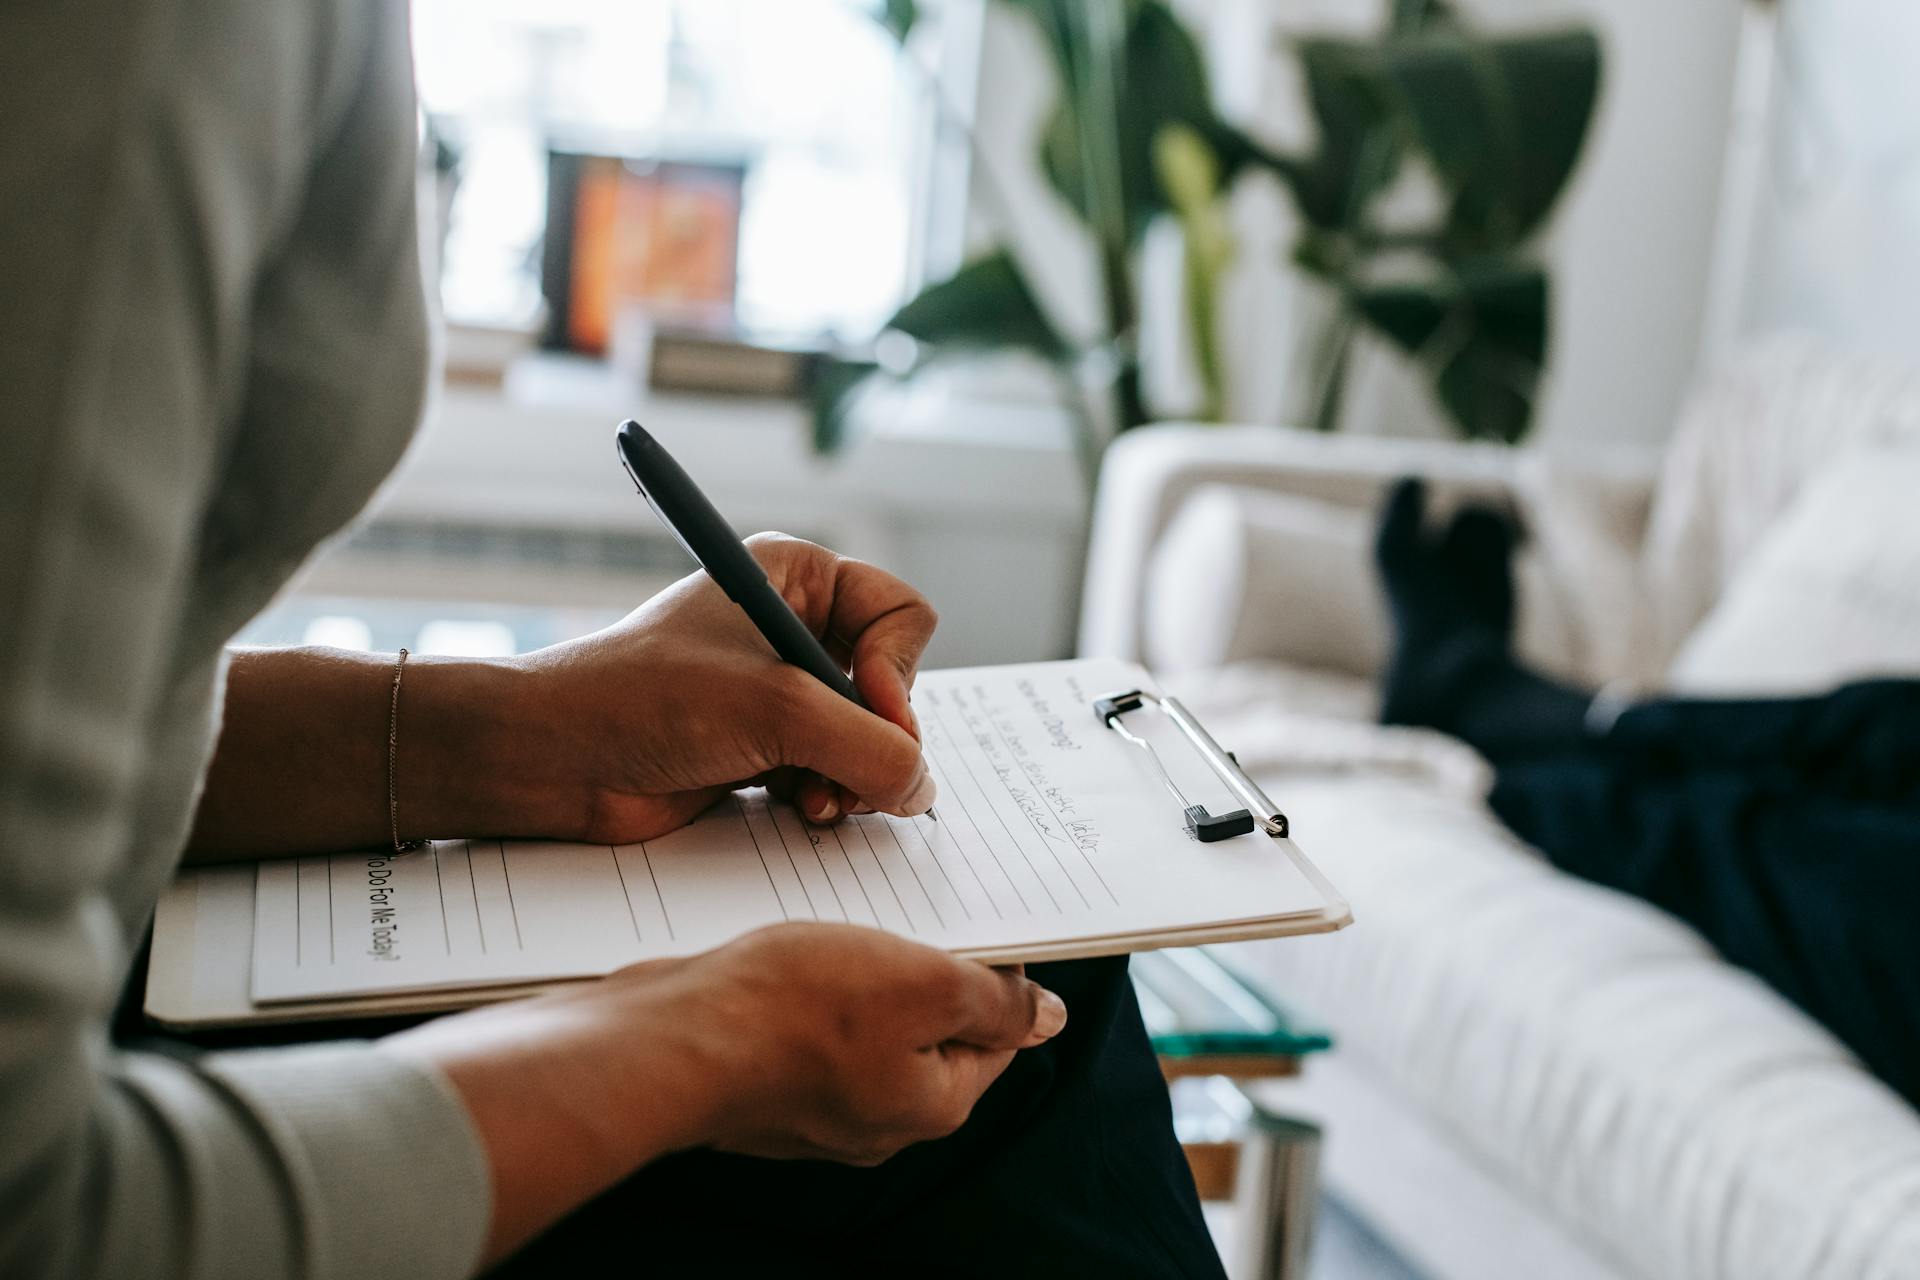 A therapist taking notes during a session | Source: Pexels